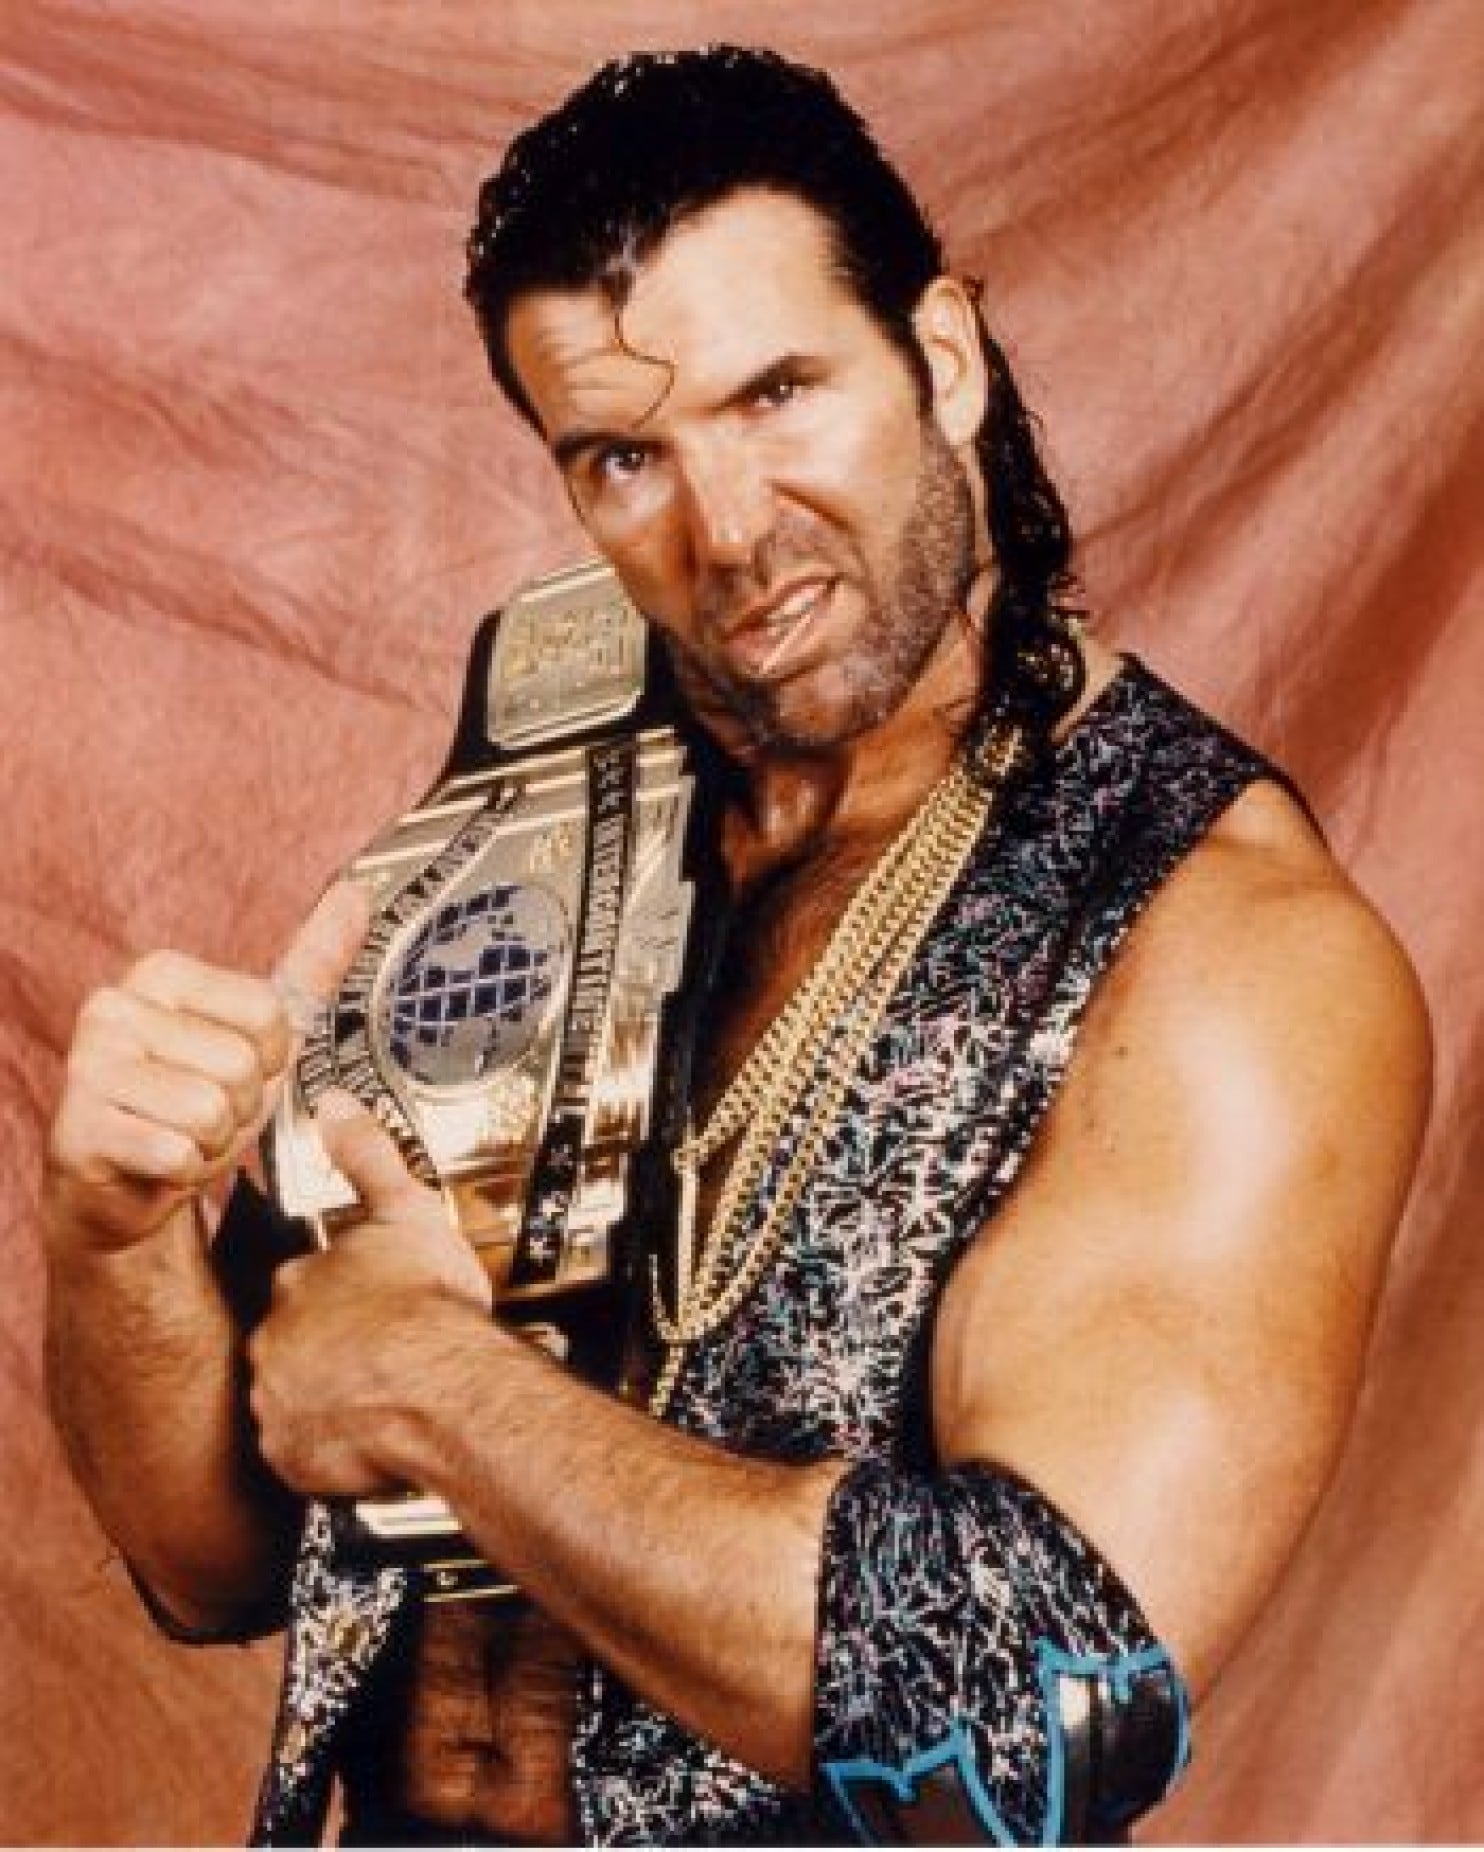 From one legend to another - Triple H grieves Scott Hall's loss